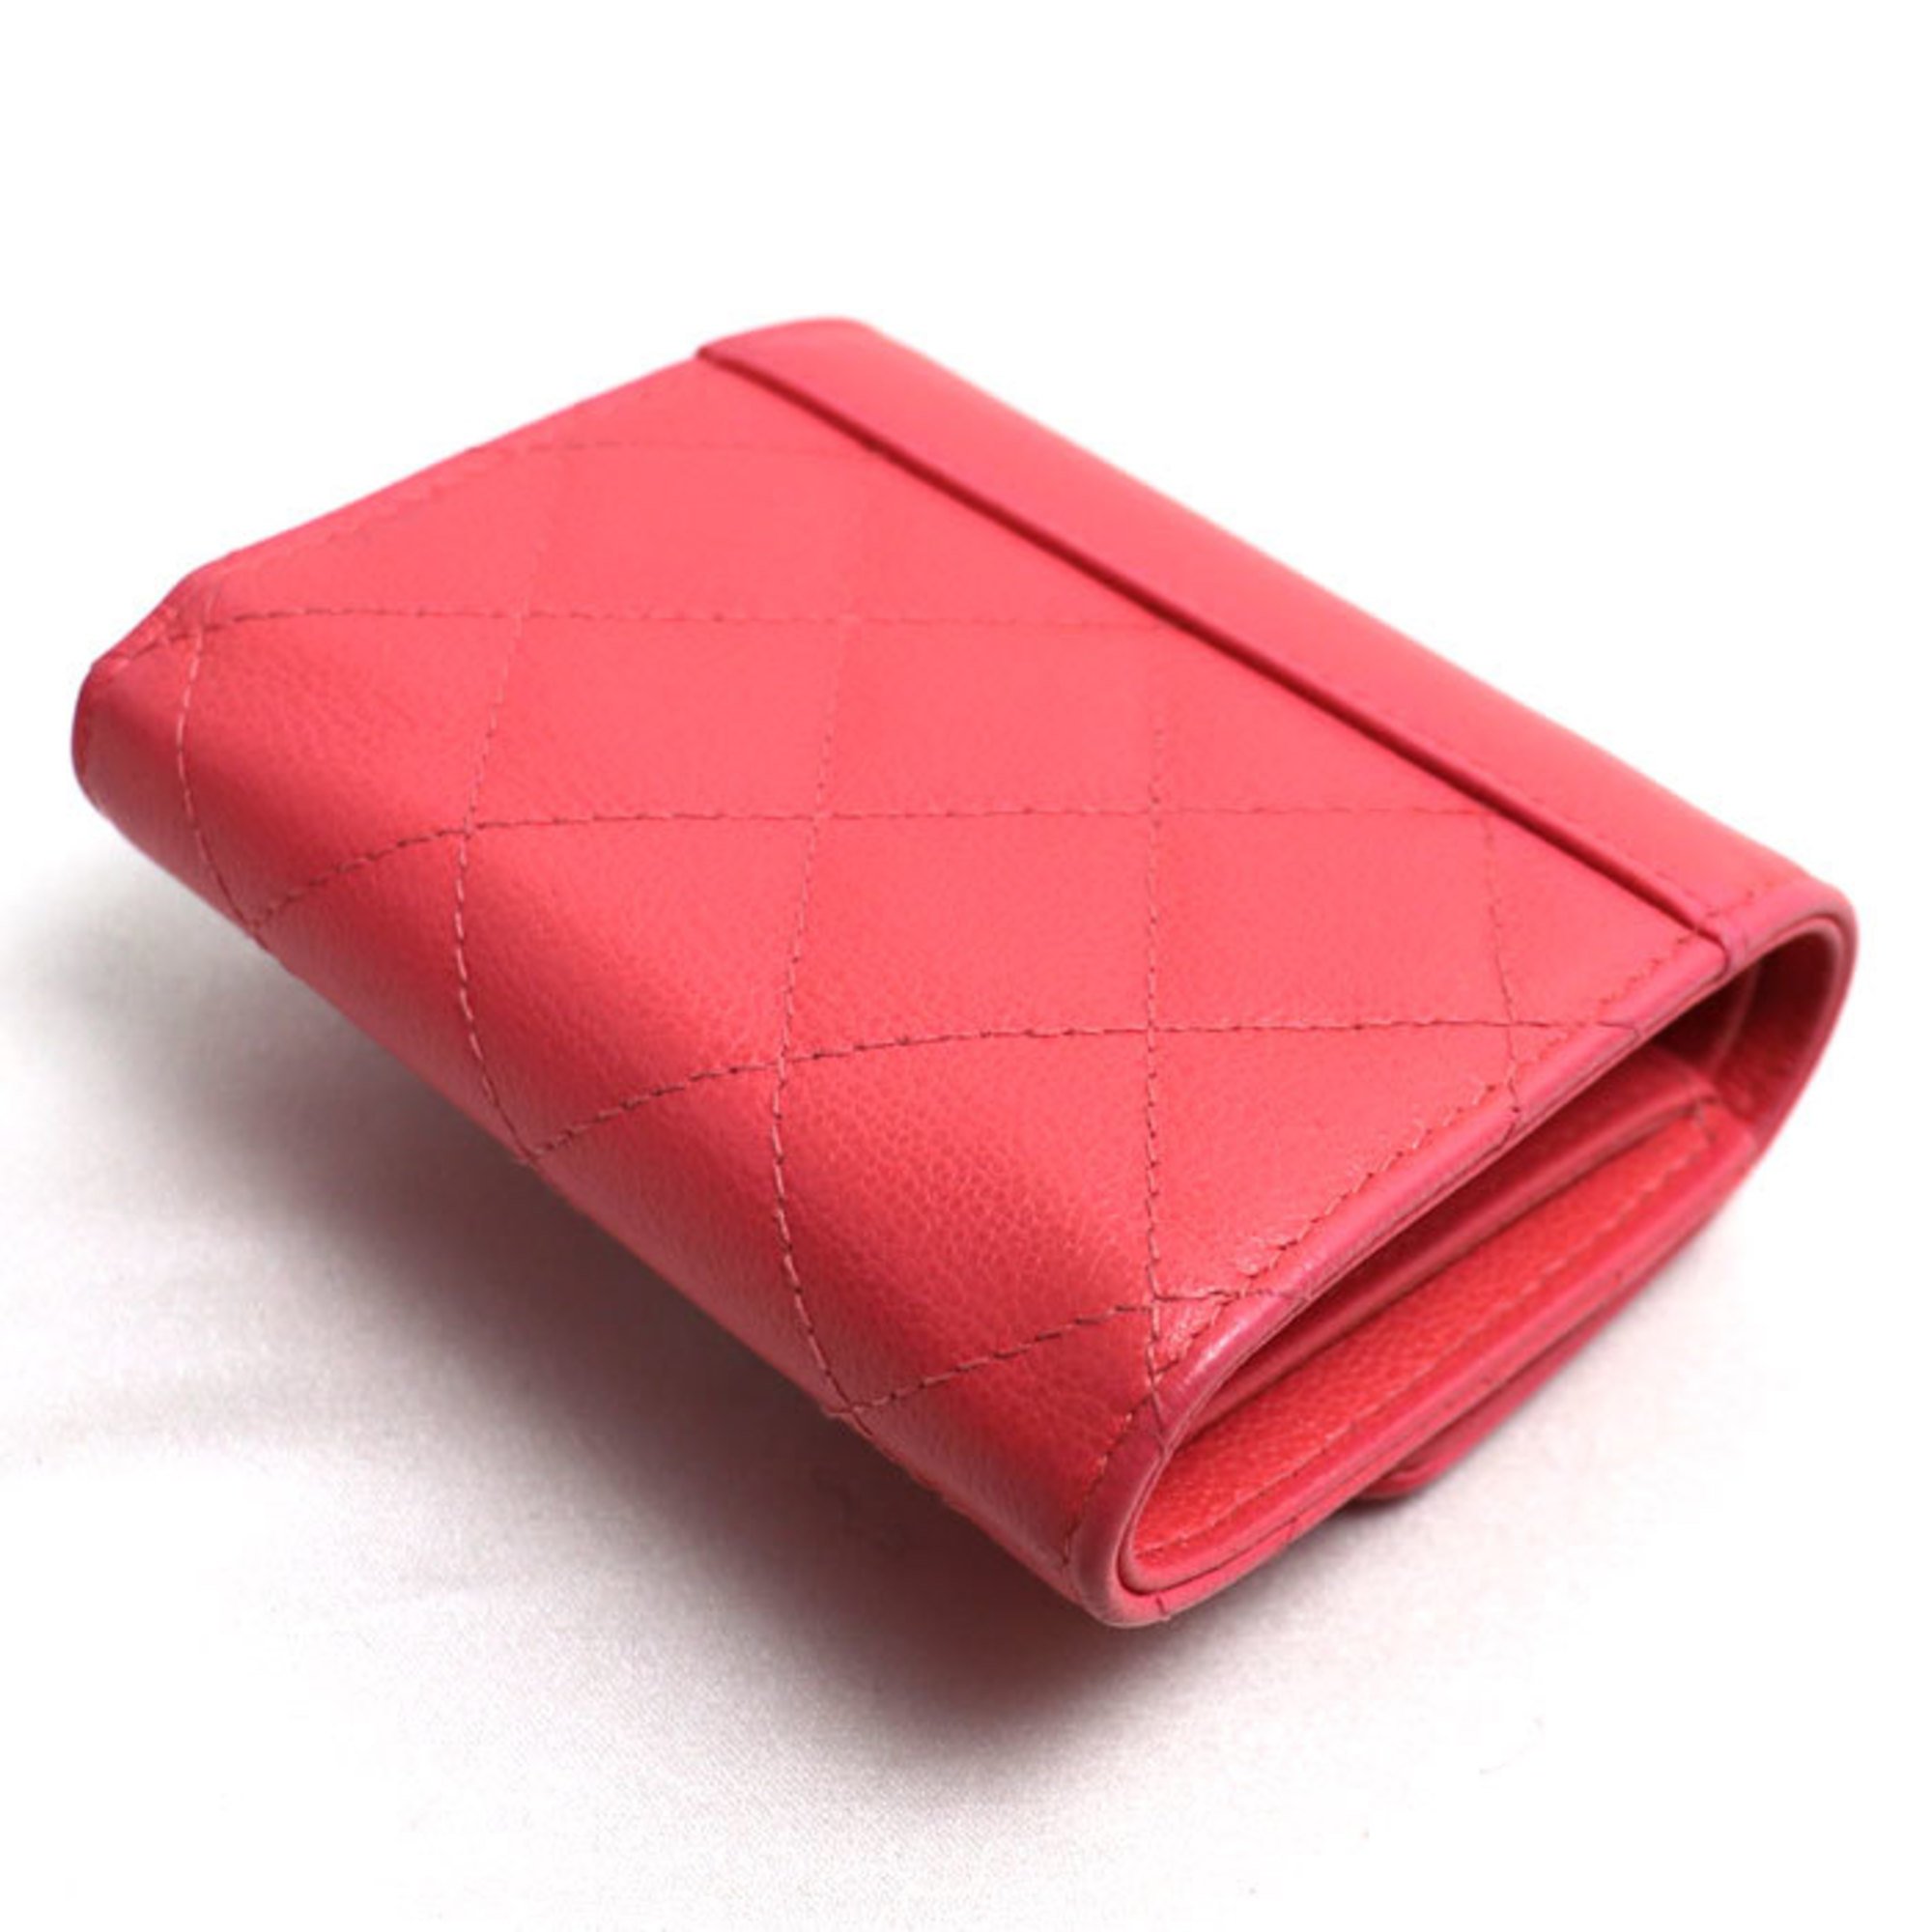 CHANEL Matelasse Small Flap Wallet Trifold Pink Ladies